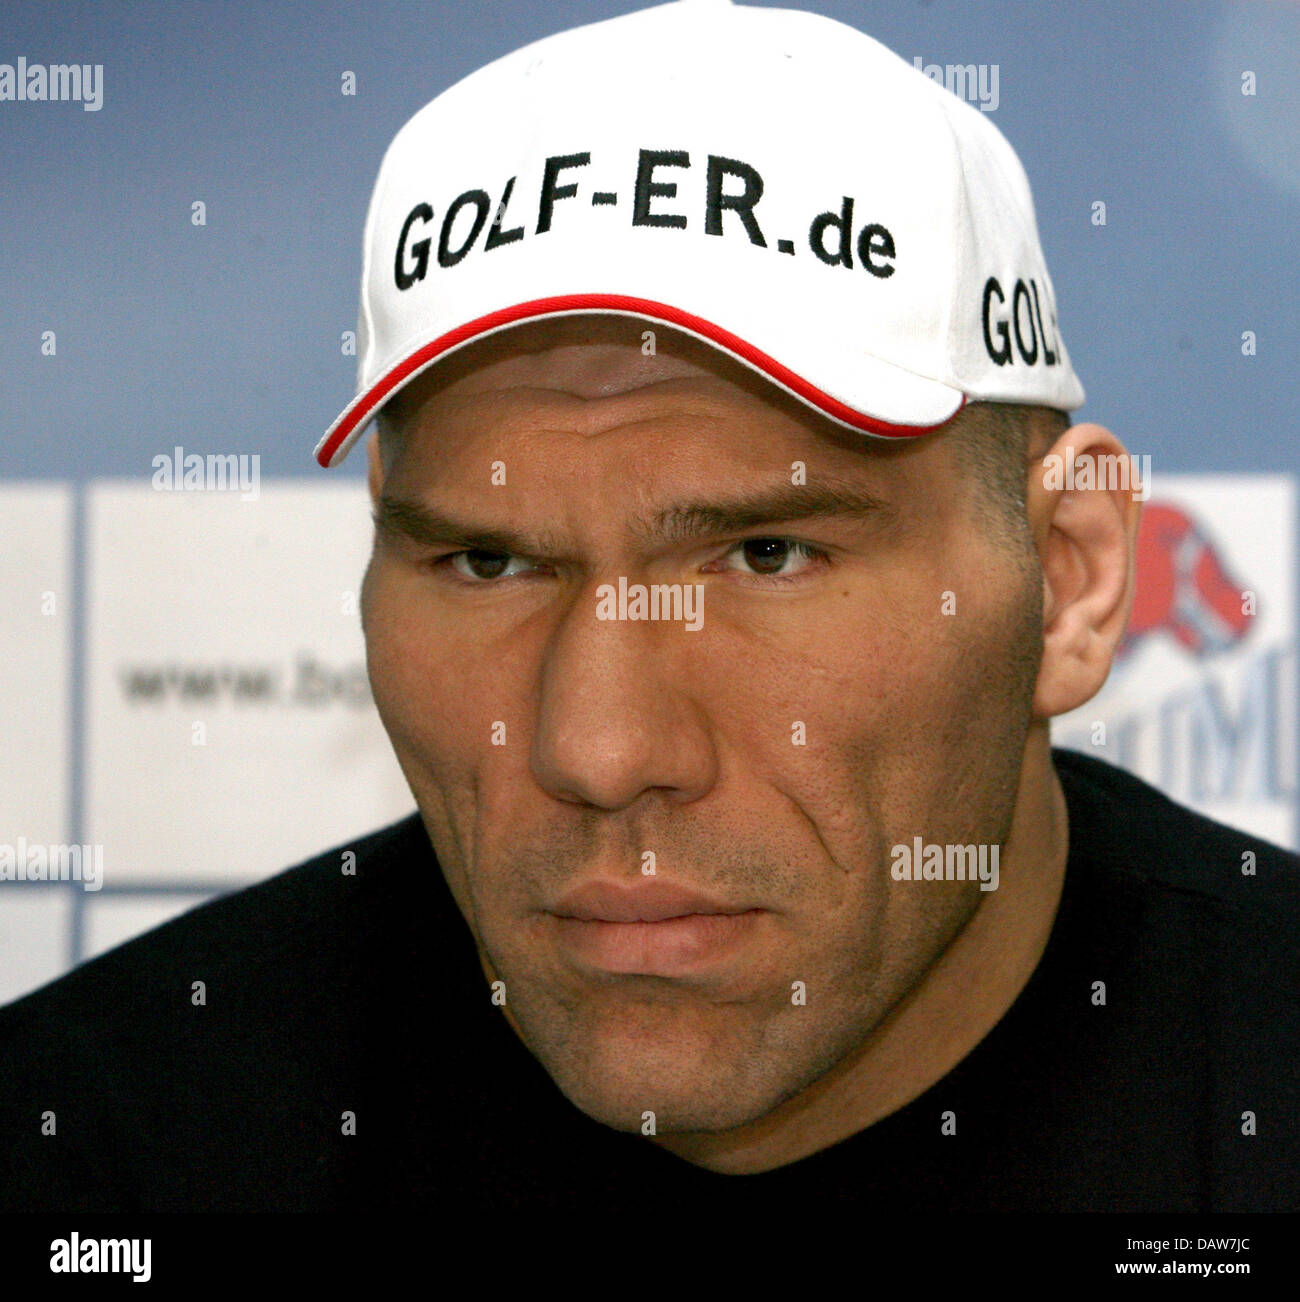 Heivy weight boxer Nikolai Valuev from Russia shown at a press conference at the Porsche Arena in Stuttgart, Germany, Tuesday, 6 March 2007. Reigning WBA World Champion Valuev wants to defend his title against Uzbek contender Chagaev in a fight on 14th April in Stuttgart. Photo: Norbert Foersterling Stock Photo